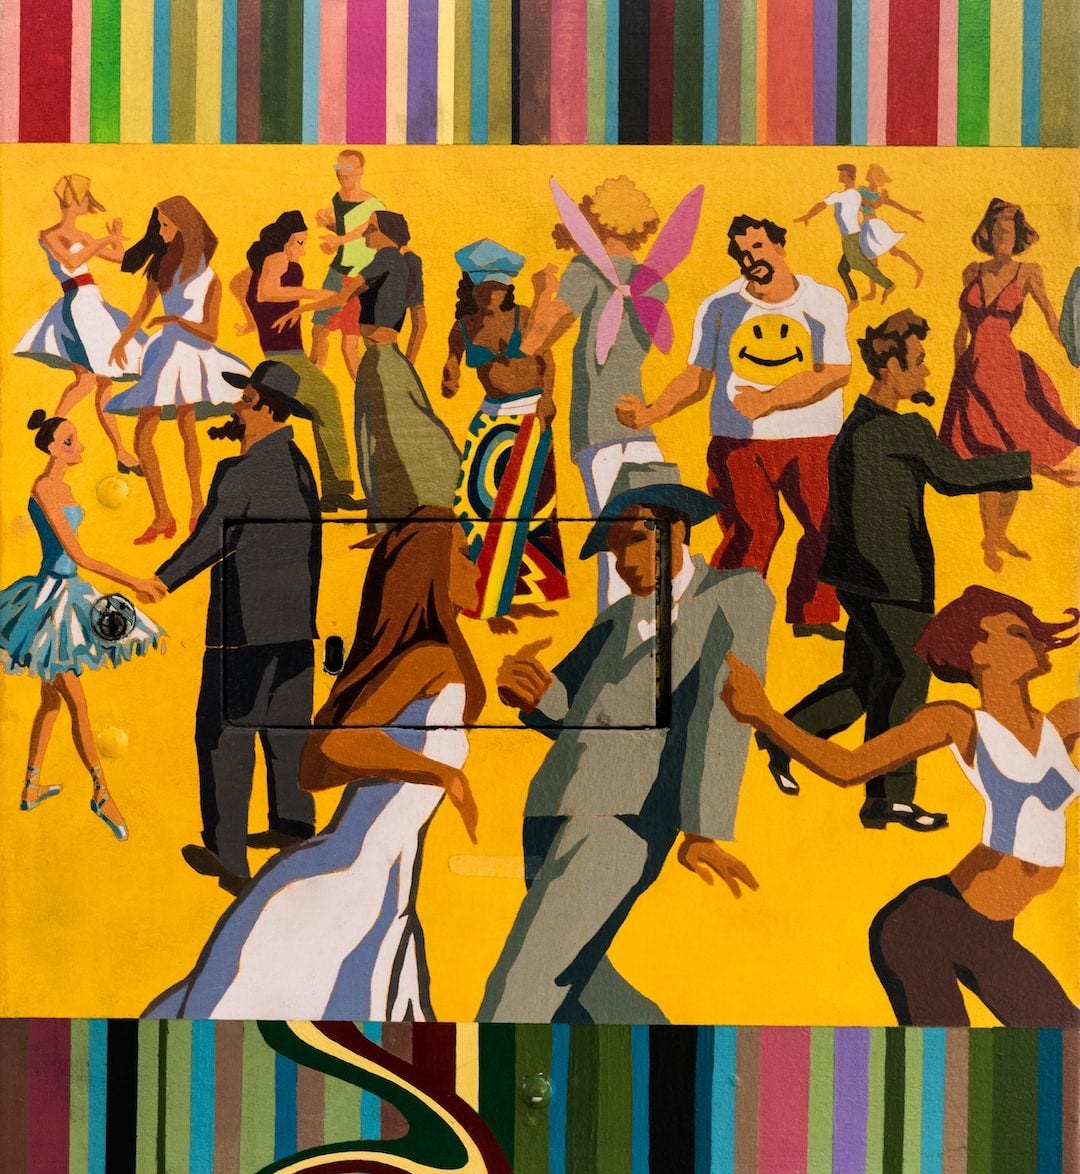 Vibrant, colorful array featuring a diverse group of people dancing with each other